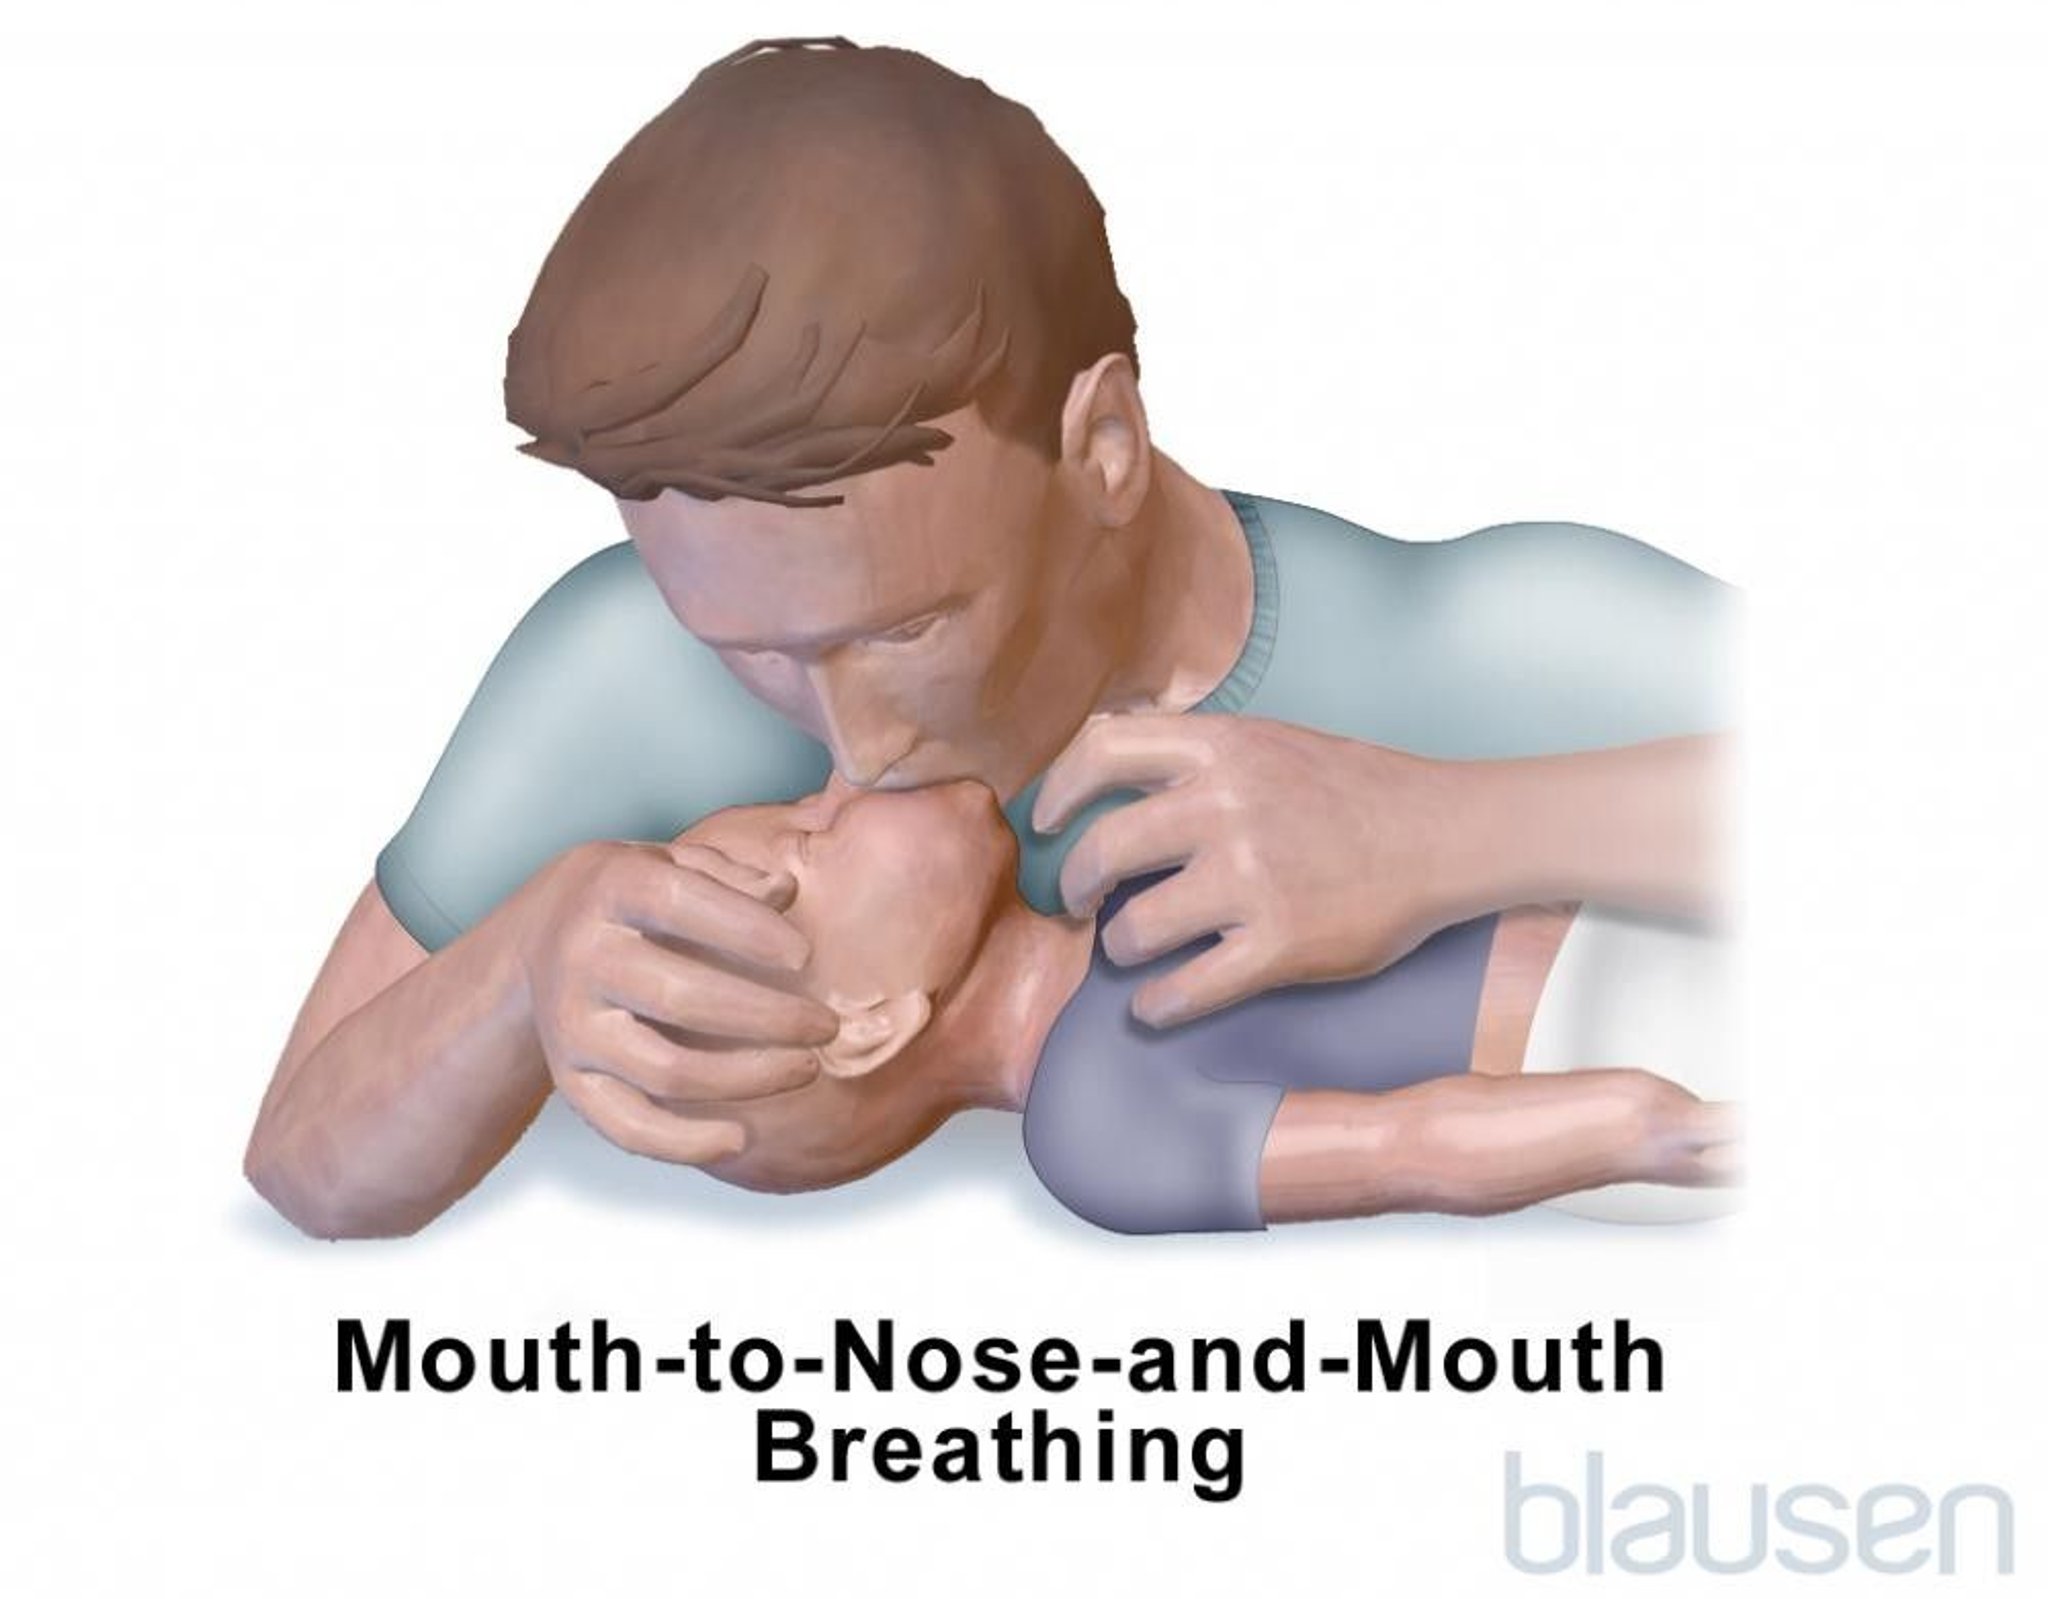 Mouth-to-Nose-and-Mouth Breathing in an Infant